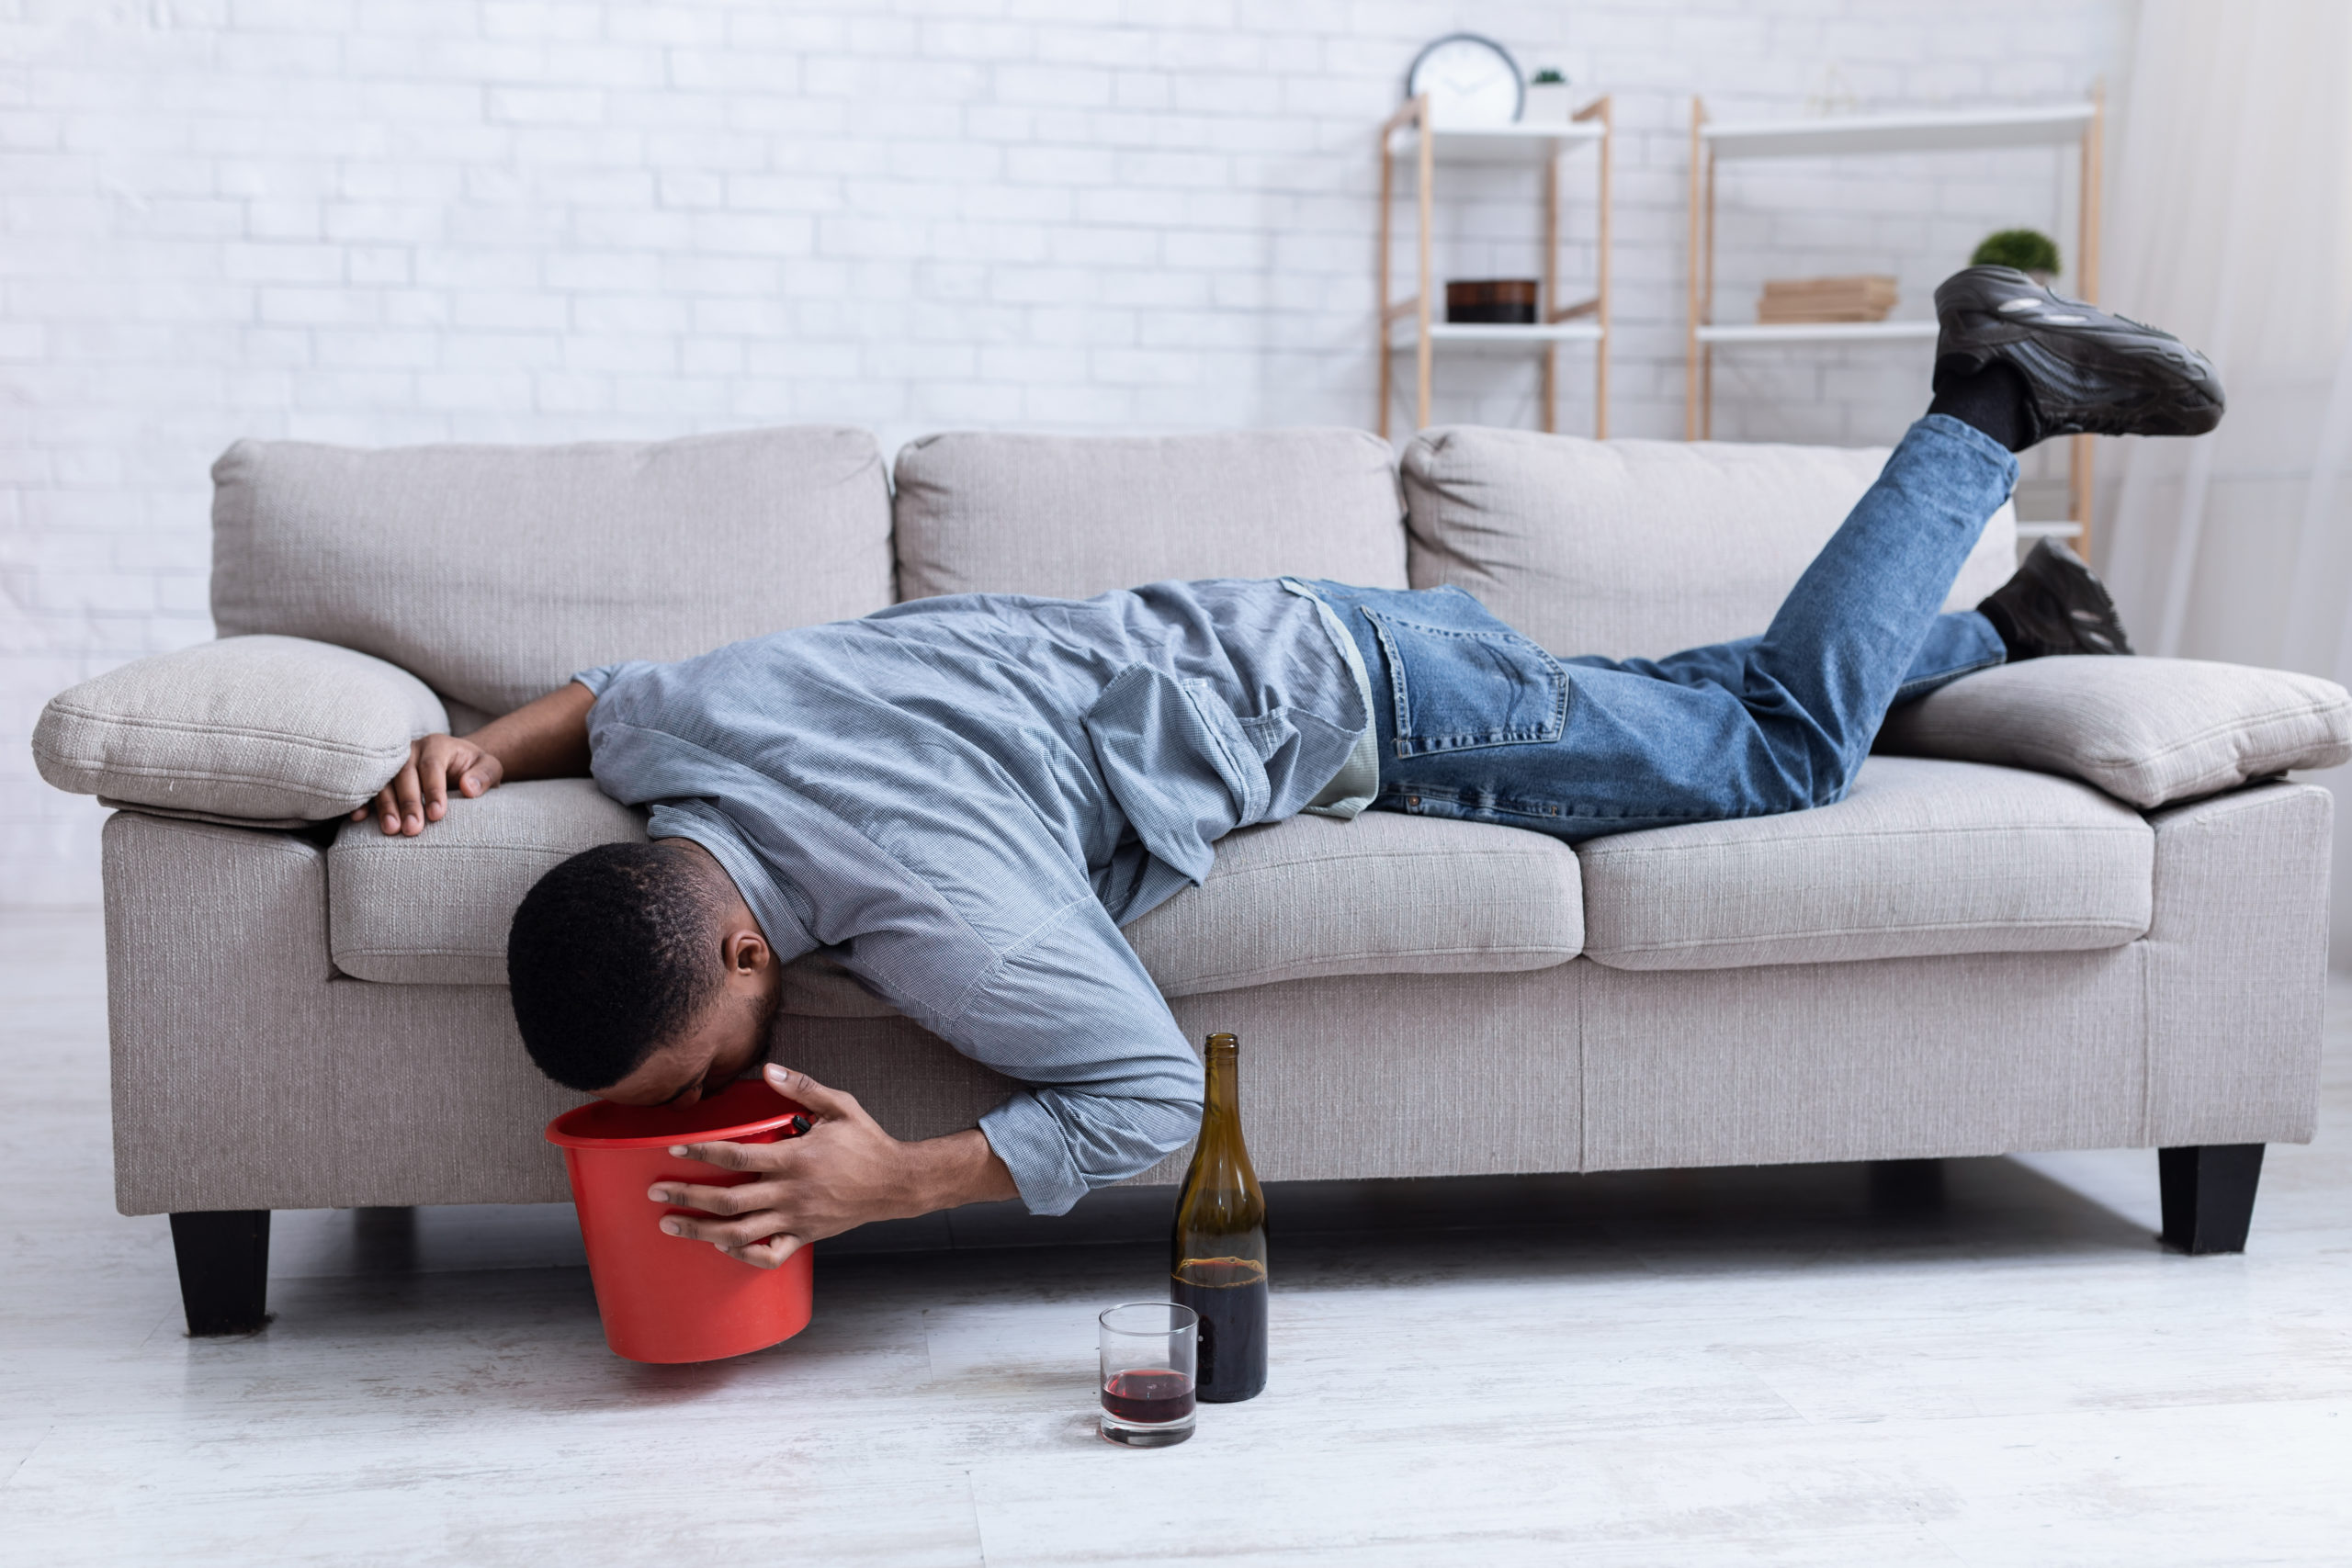 Exploring the Social and Psychological Costs of Binge Drinking